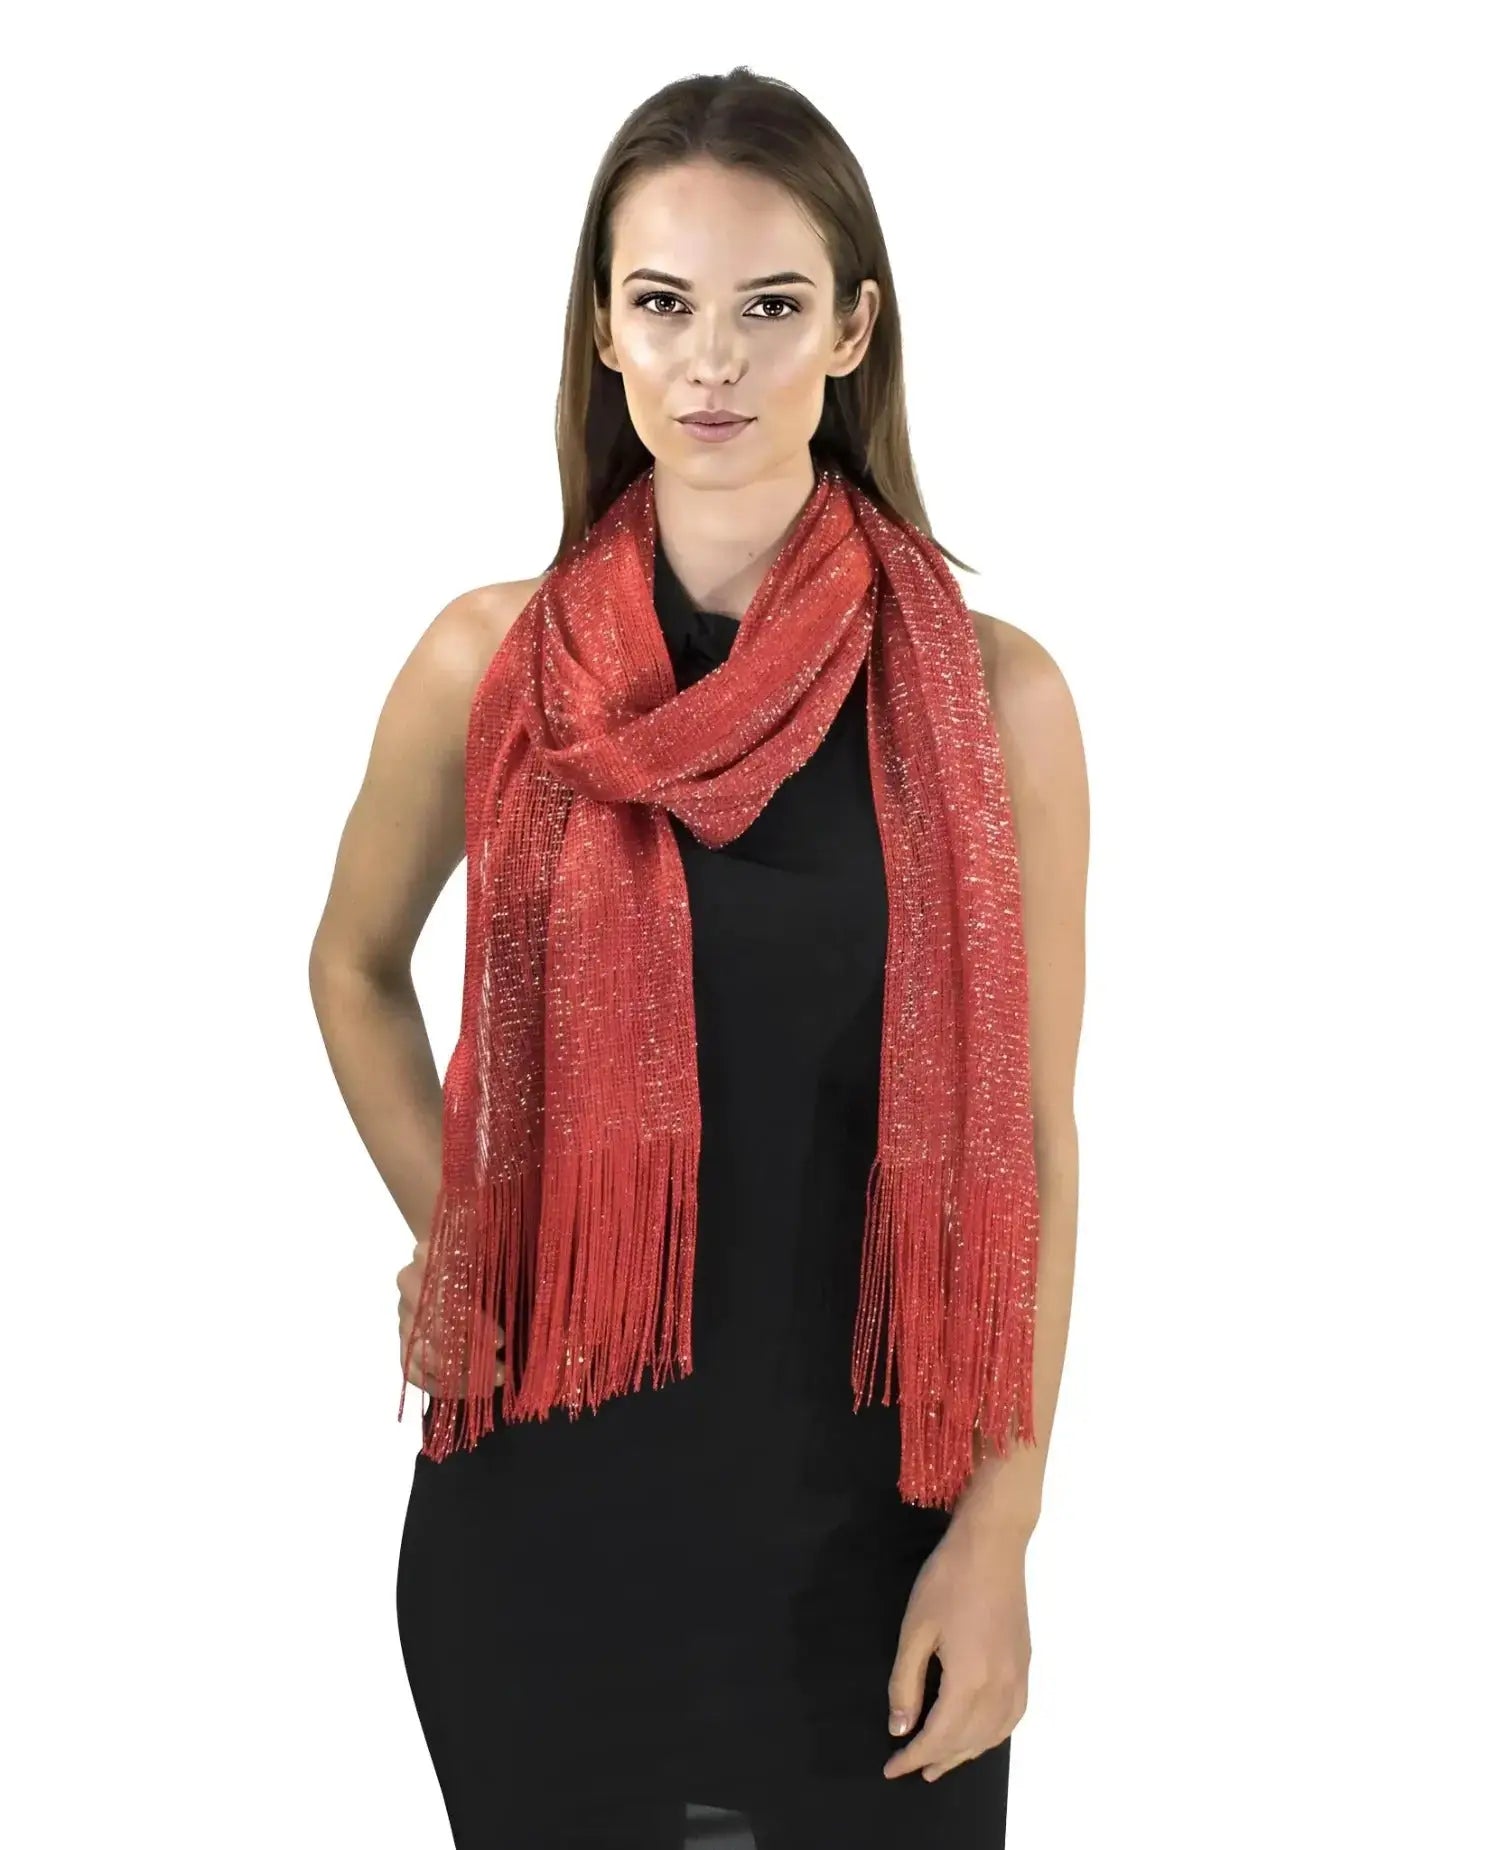 Woman wearing red shimmering lurex scarf from Shimmering Lurex Scarf Fishnet Evening Shawl Scarves